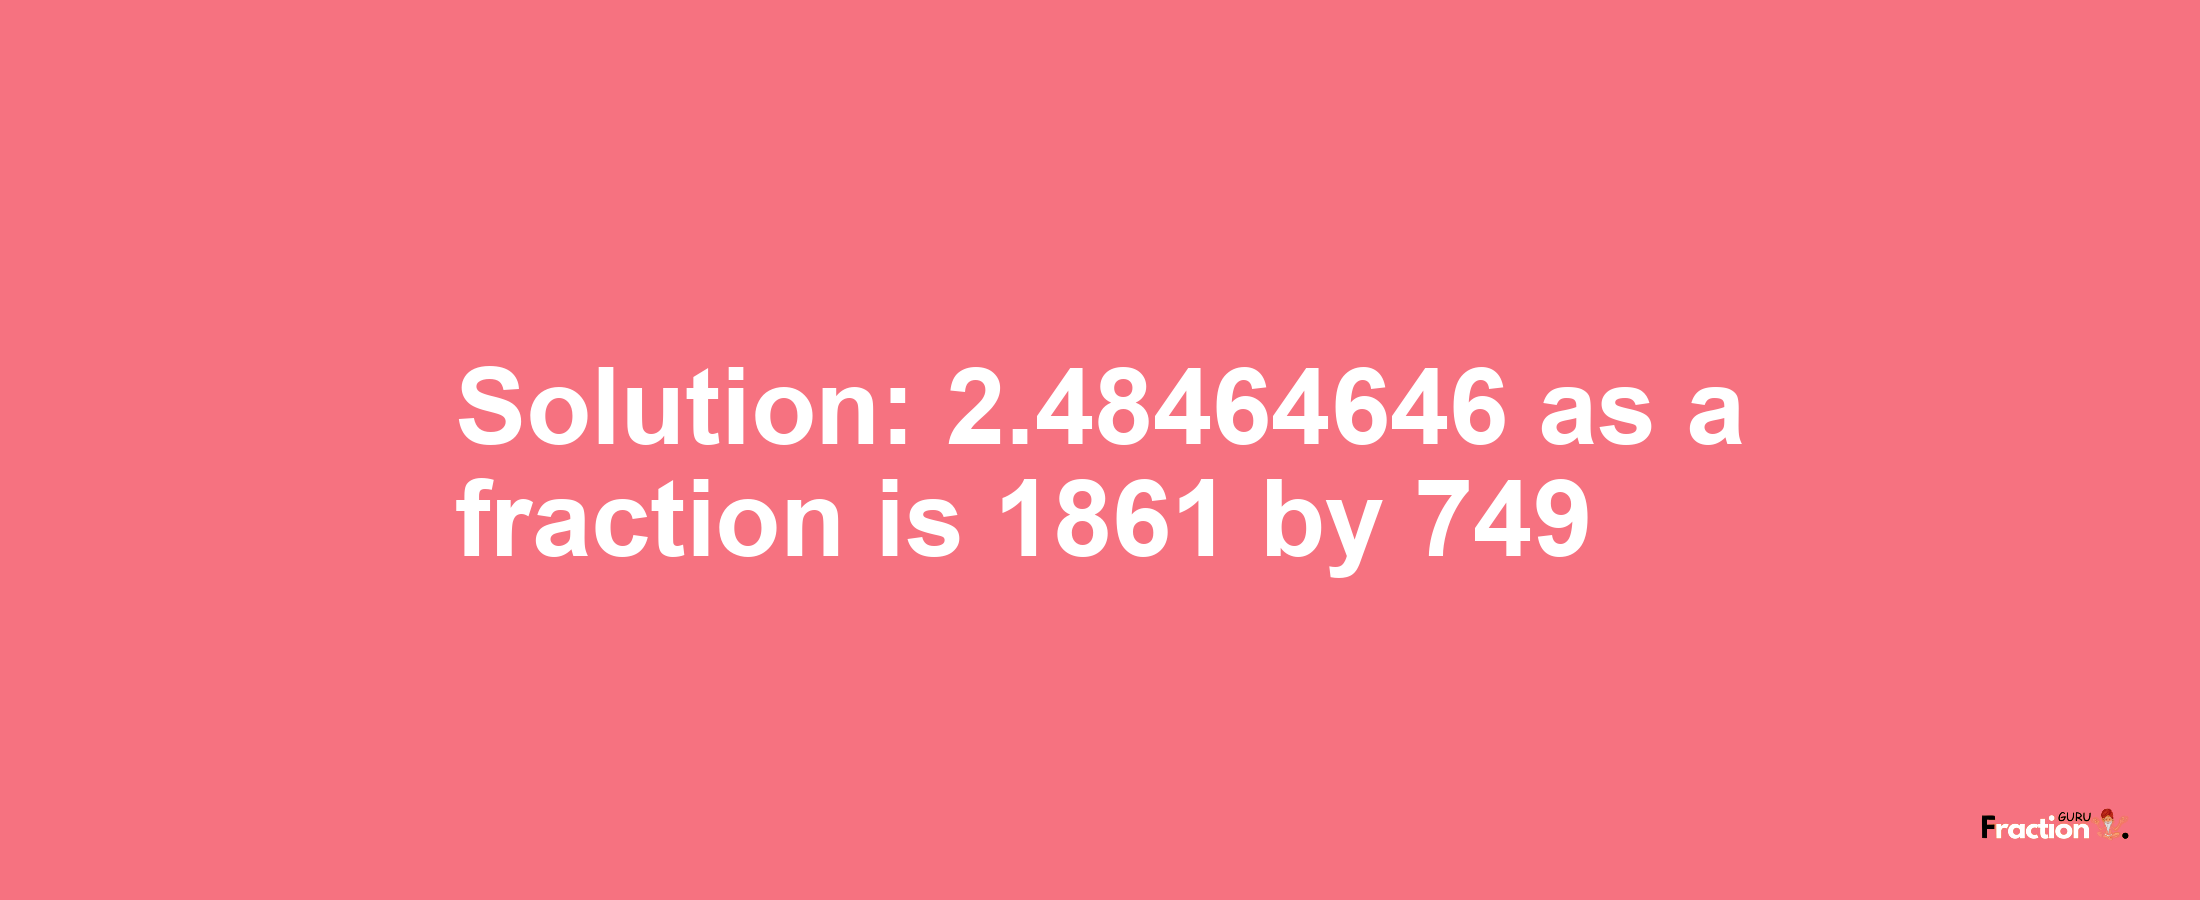 Solution:2.48464646 as a fraction is 1861/749